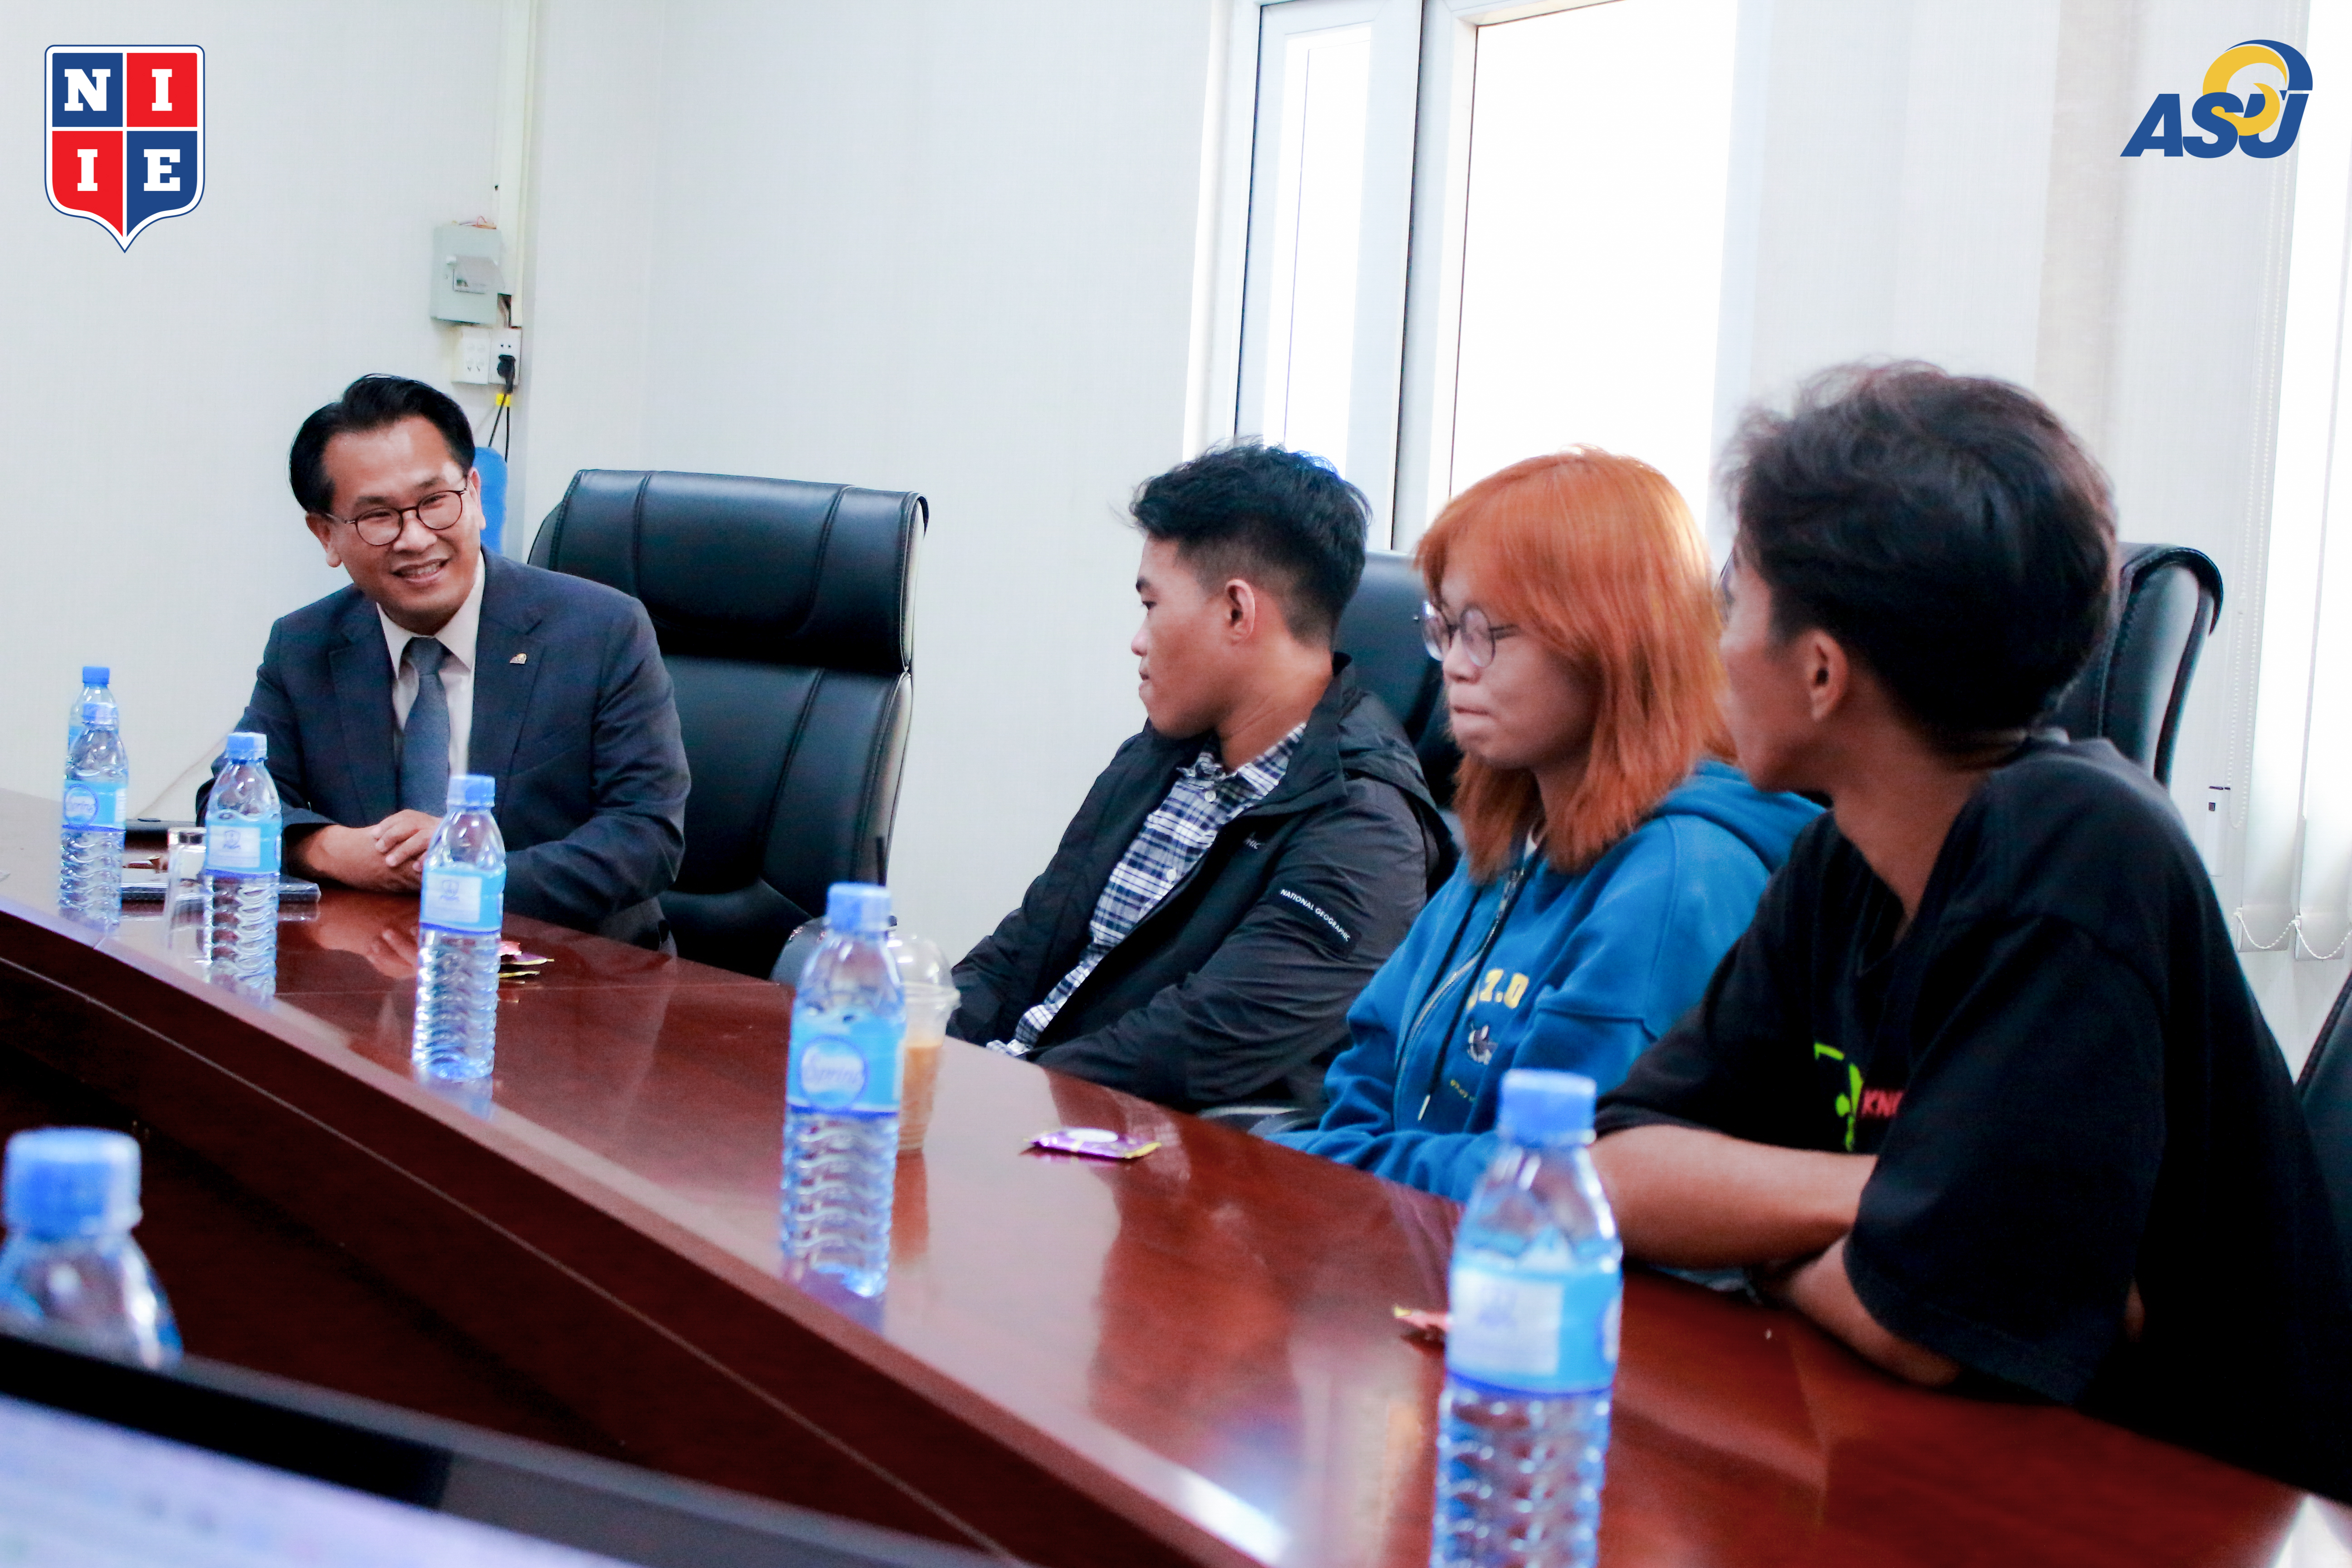 Besides, Prof. Dr. Won-Jae-Lee also listened and answered the student's questions